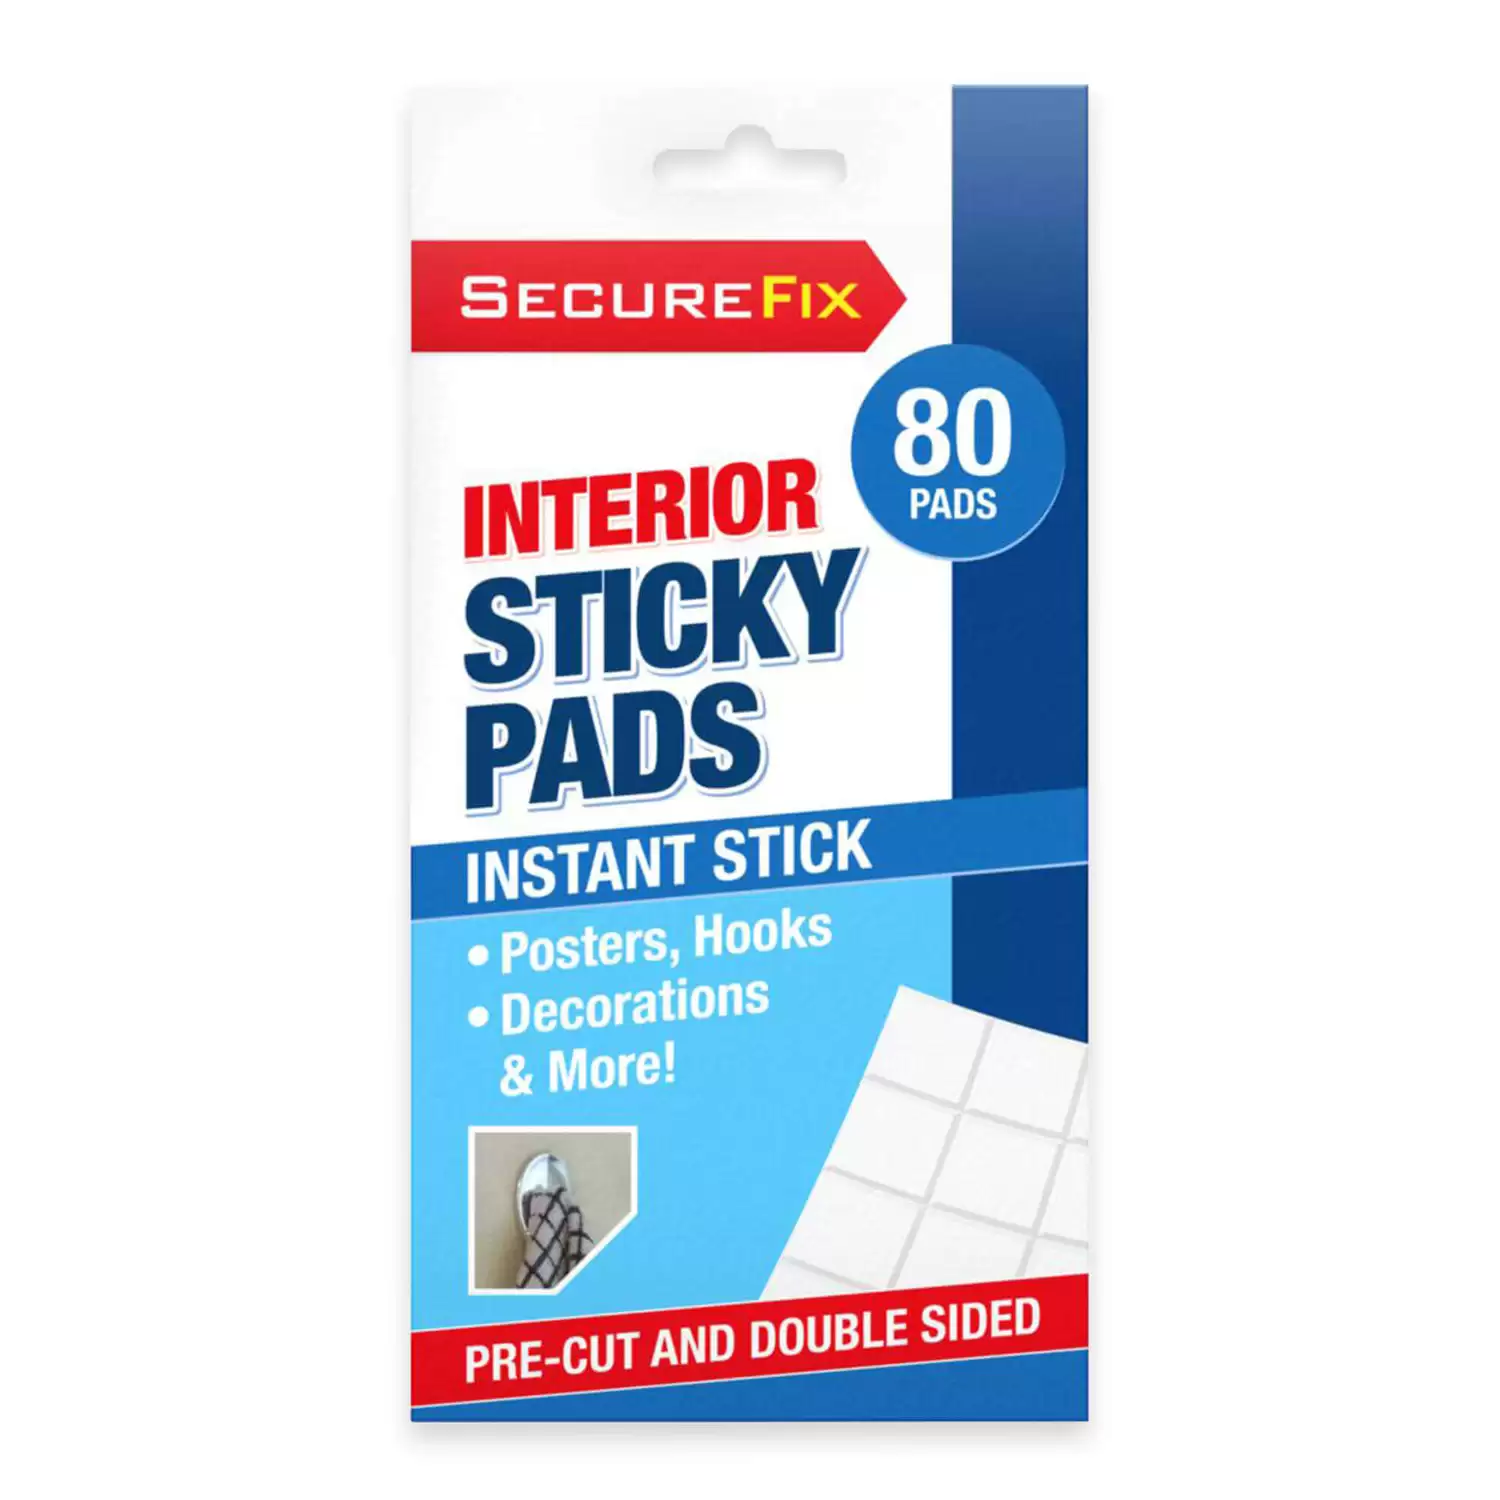 Interior Sticky Pads 80 Pack - Gompels - Care & Nursery Supply Specialists